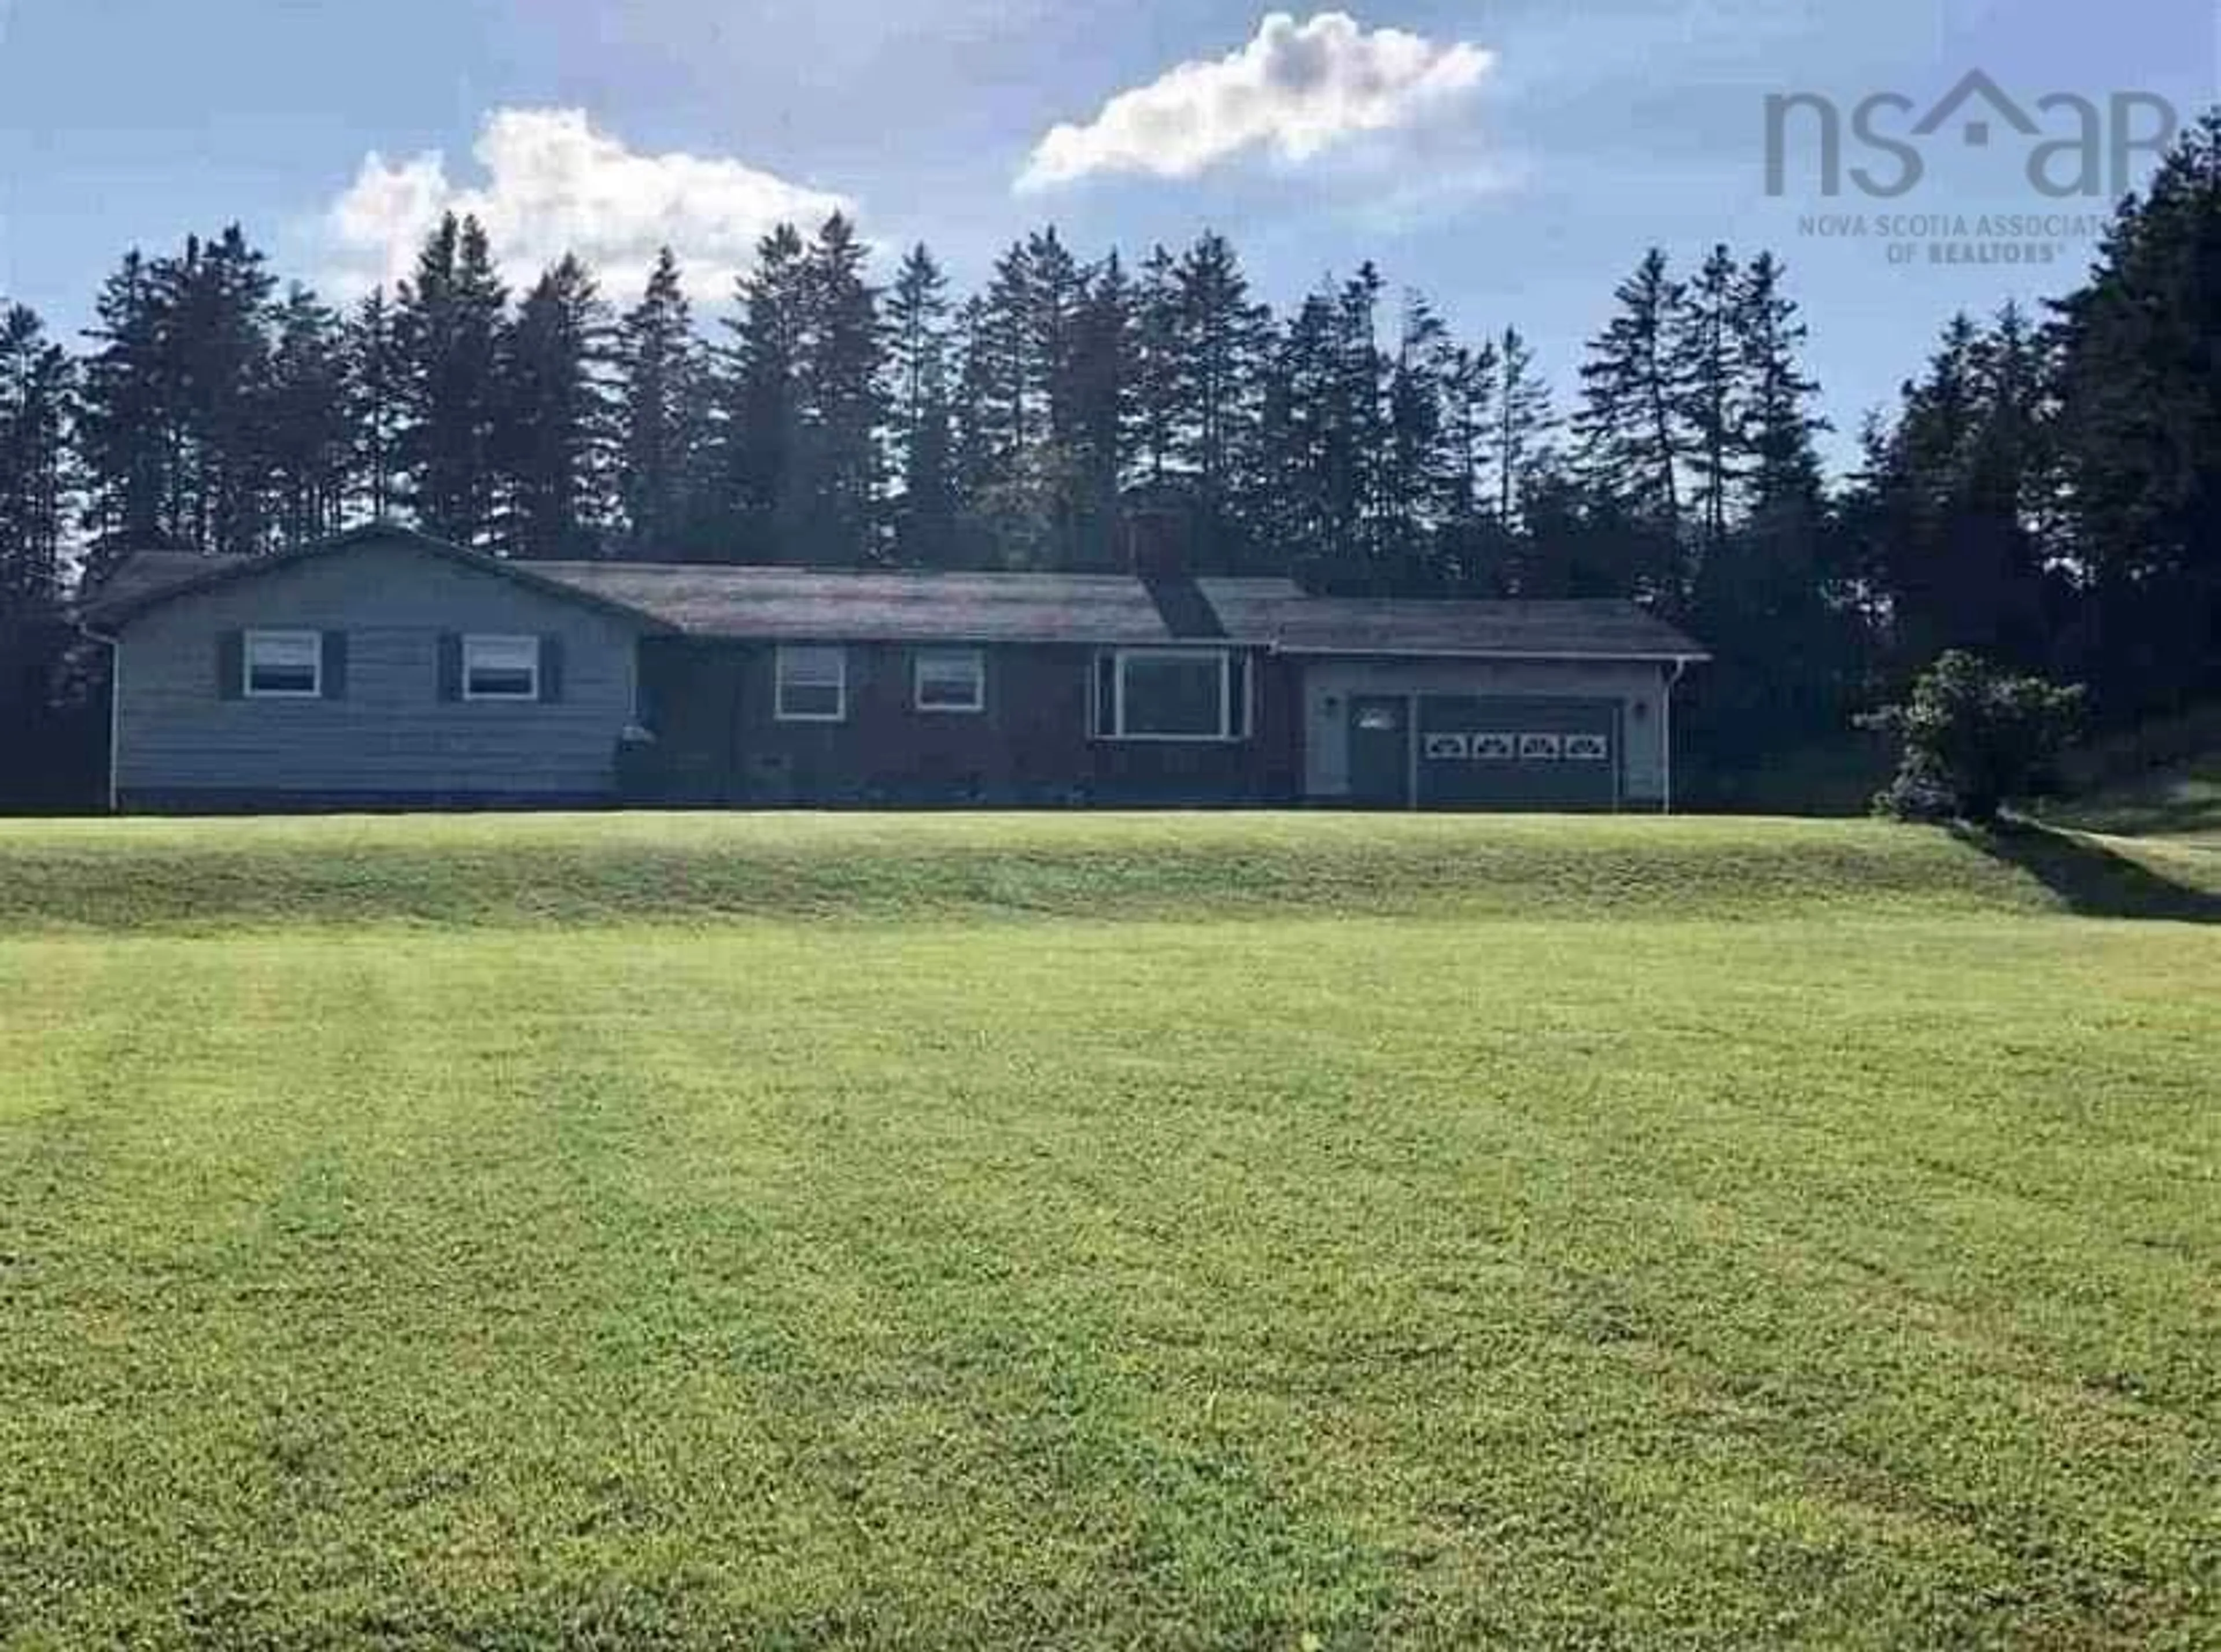 Home with unknown exterior material for 649 Highway 245, North Grant Nova Scotia B2G 2L1